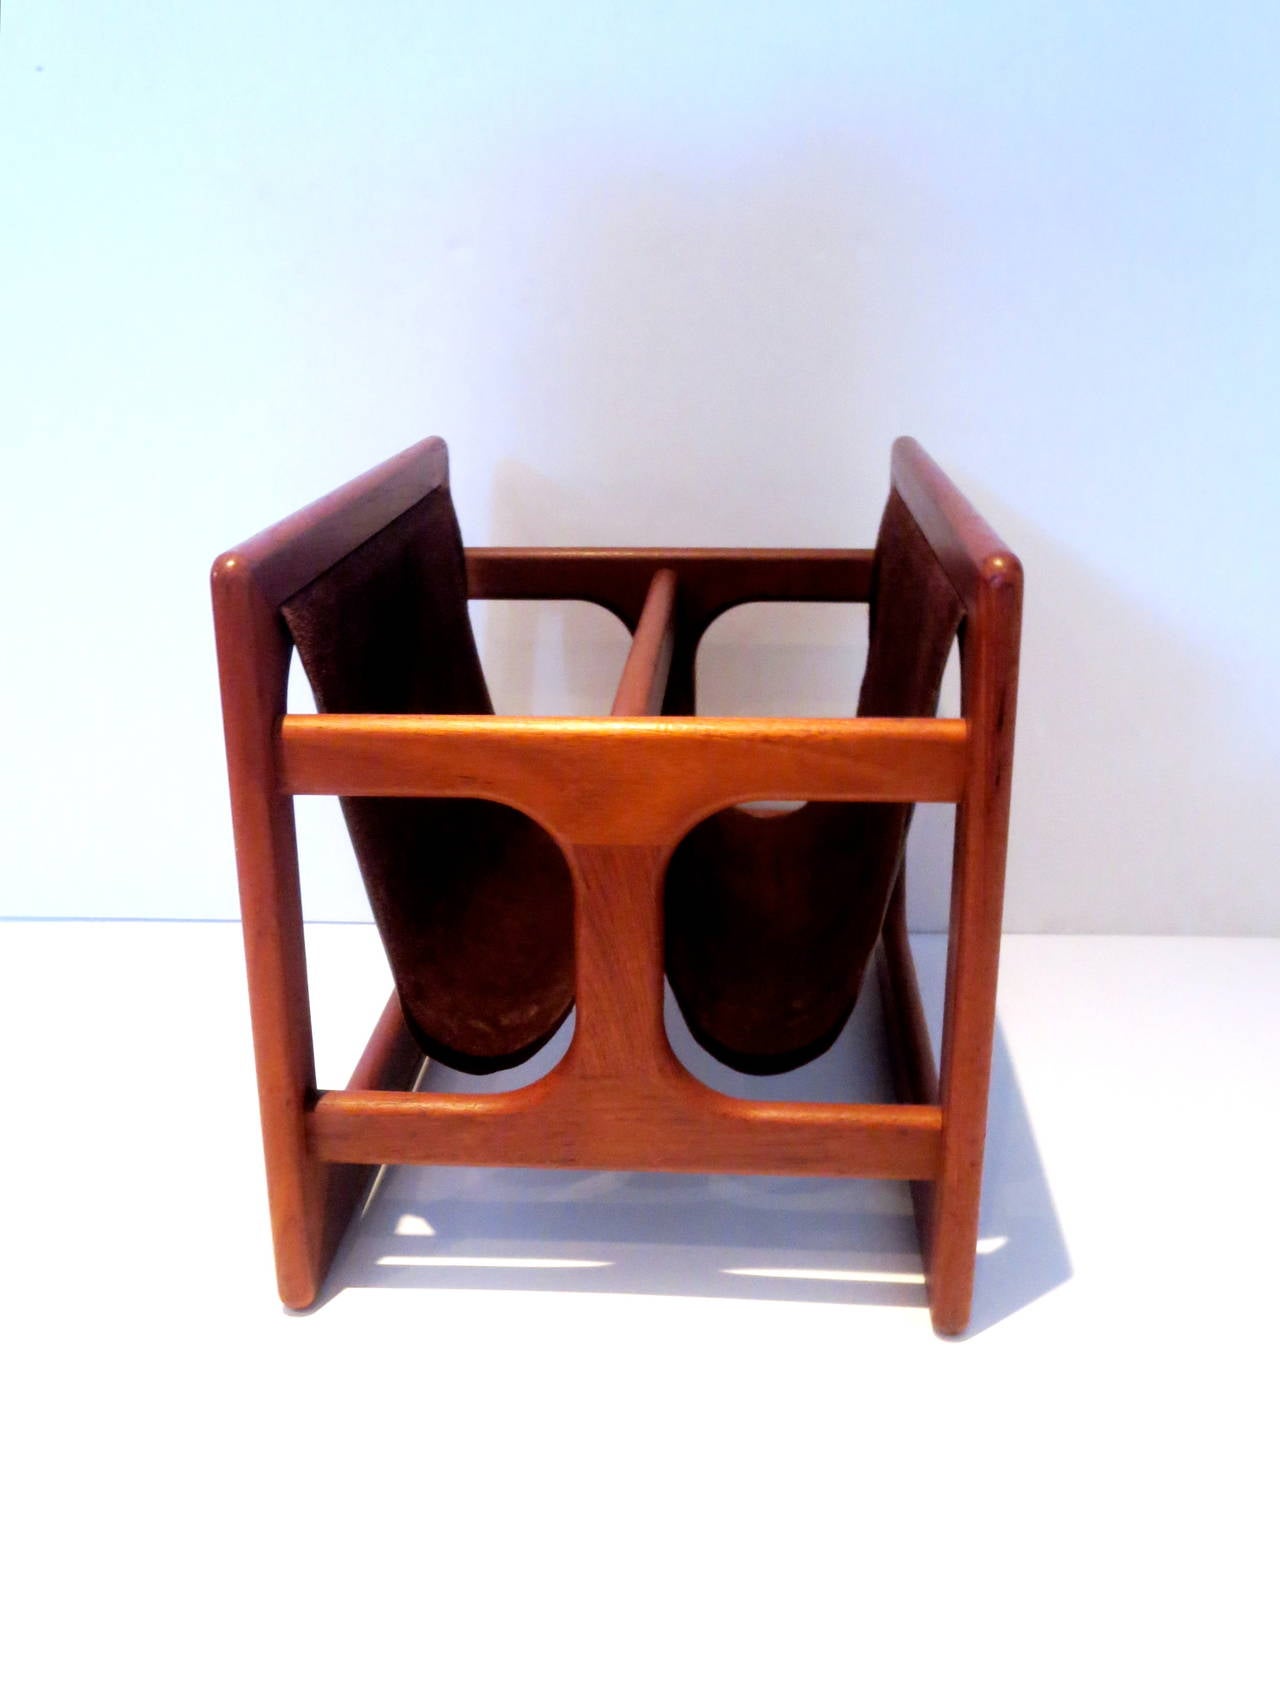 A very rare and beautiful solid teak and chocolate leather inserts magazine rack, unknown designer in great condition, circa 1970s.